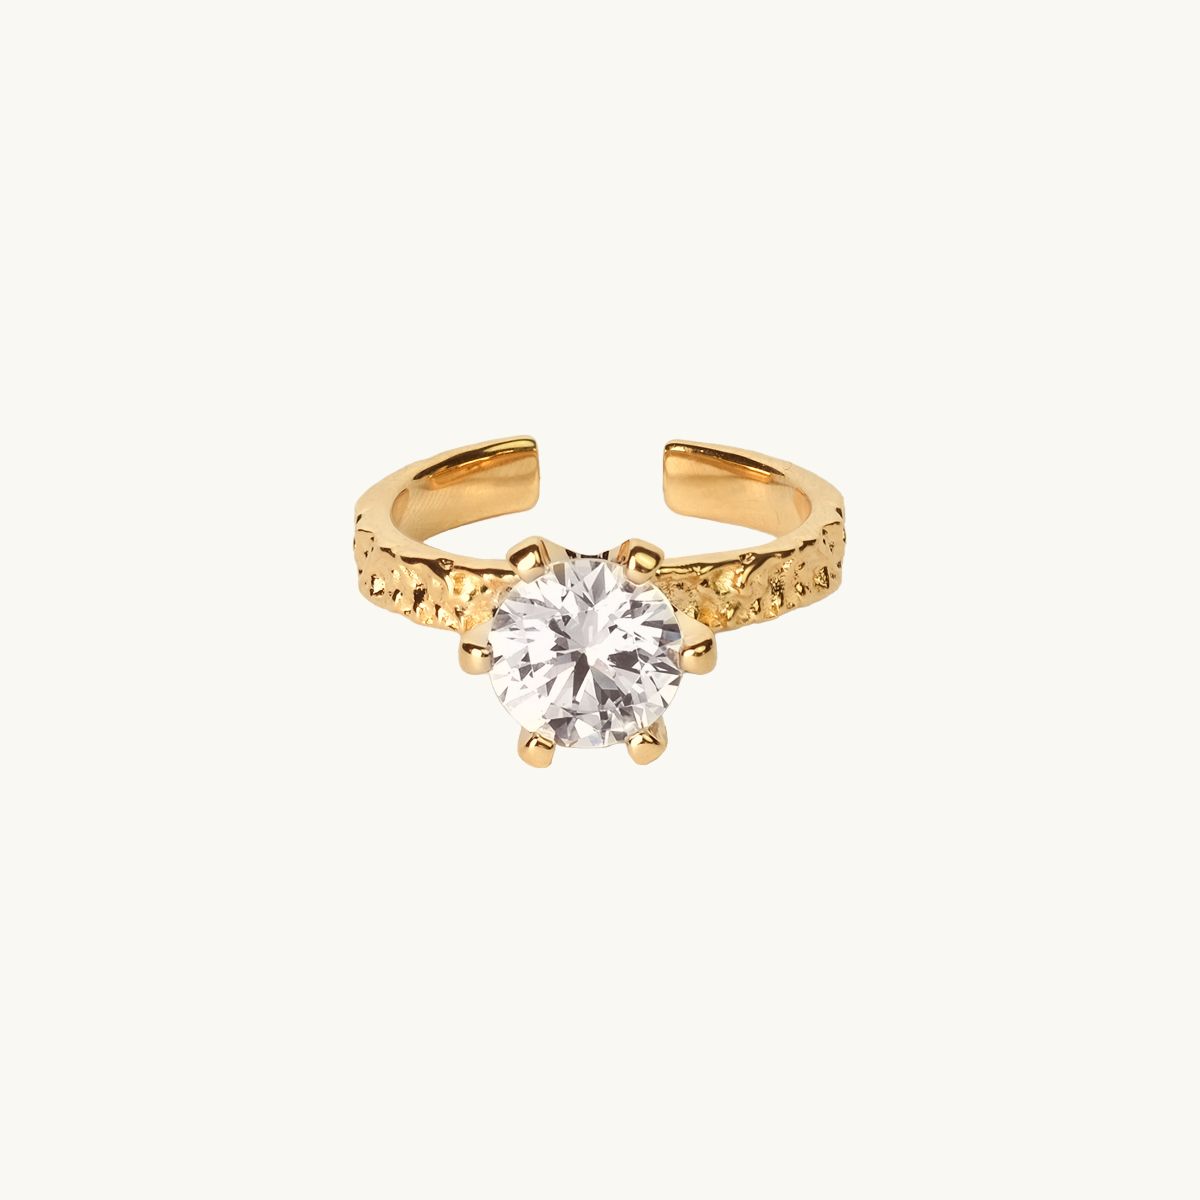 Adjustable princess ring in gold with cz stone